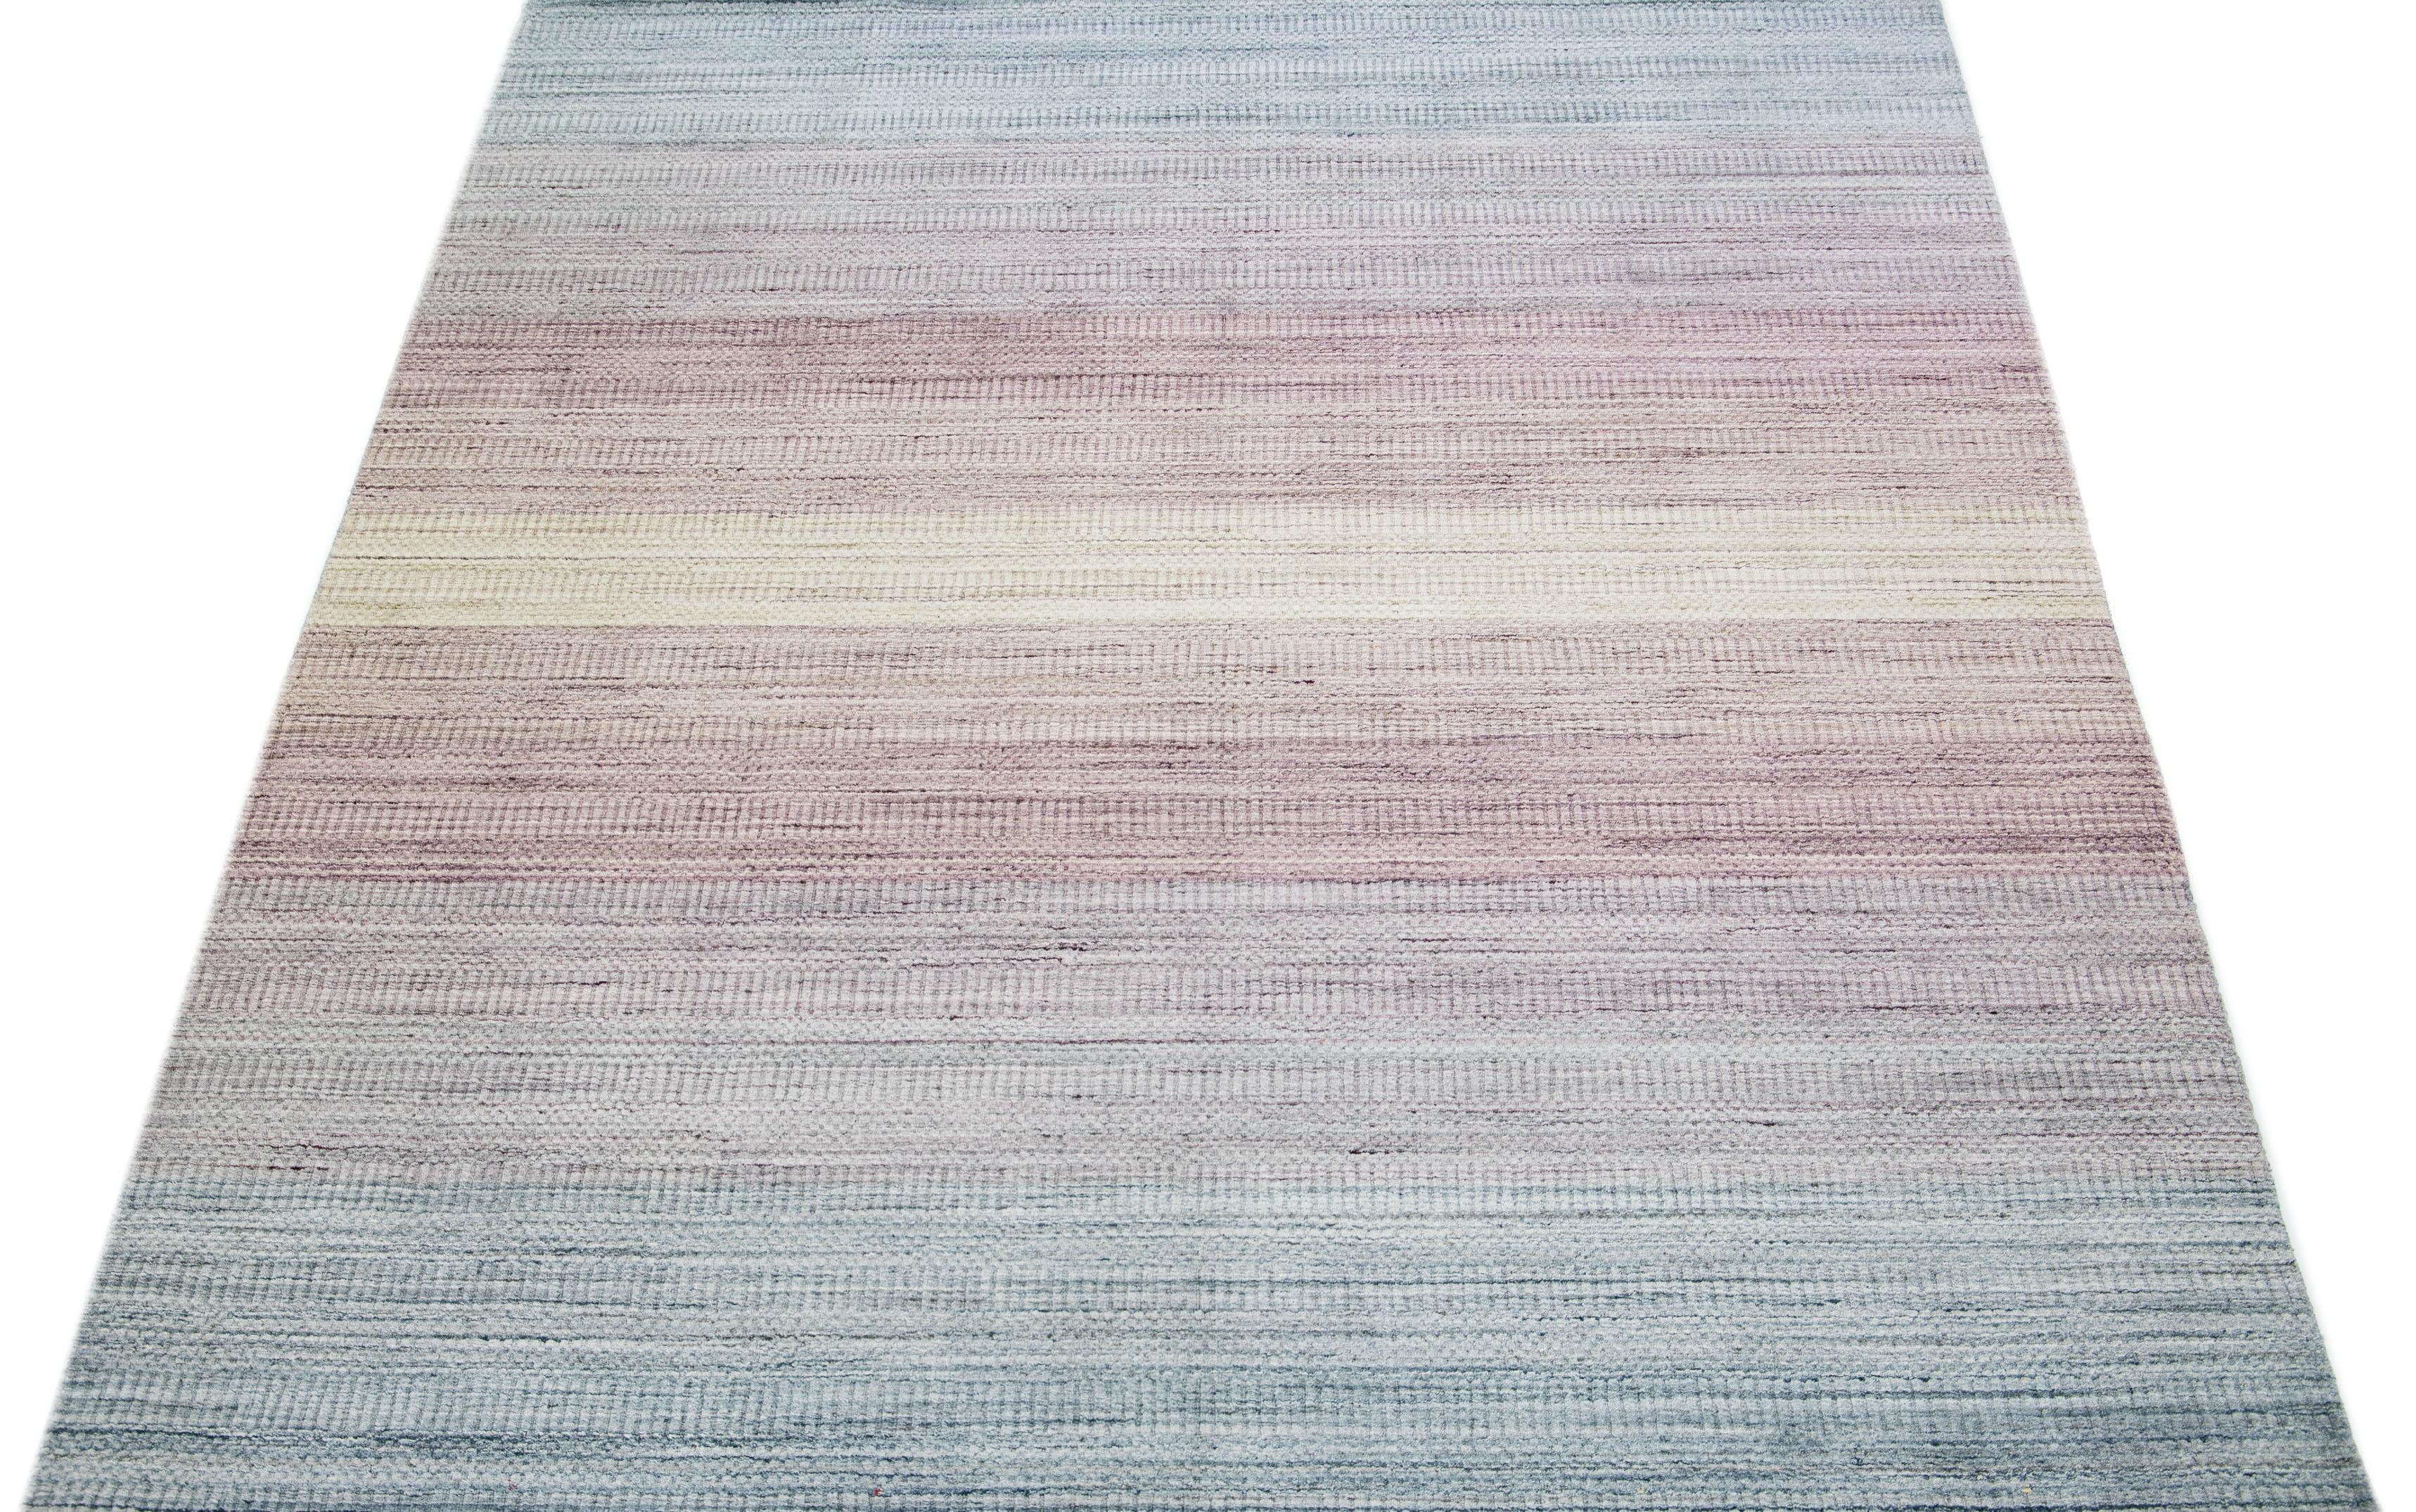 Beautiful Apadana's handmade bamboo & silk Indian groove rug with pink and blue colors field. This groove collection rug has an all-over stripe design.

This rug measures 7'6